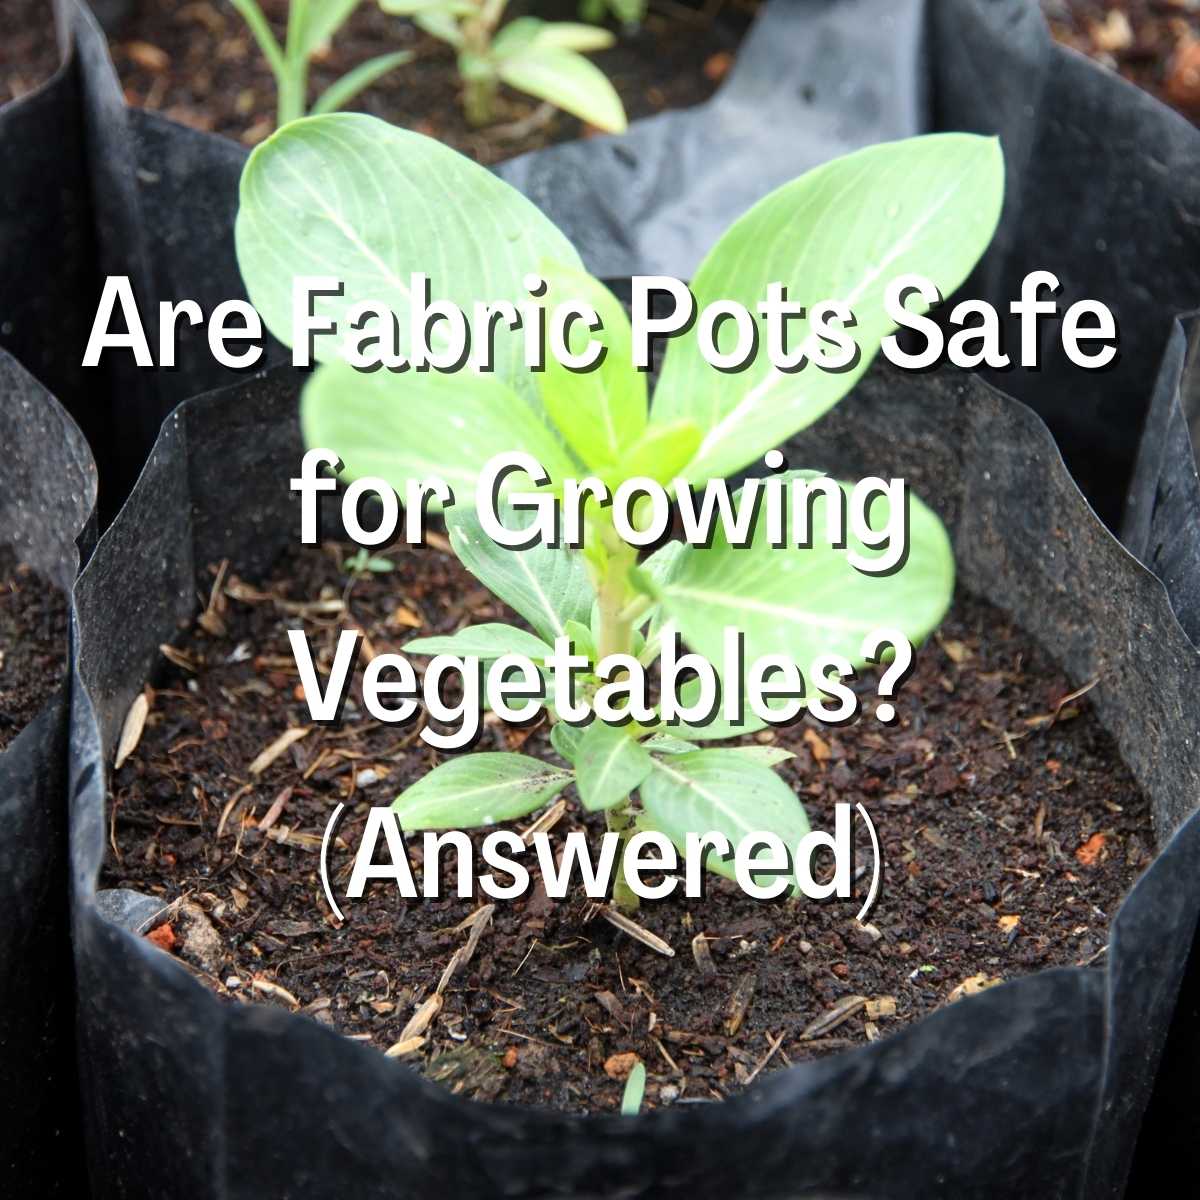 Are Fabric Pots Safe for Growing Vegetables